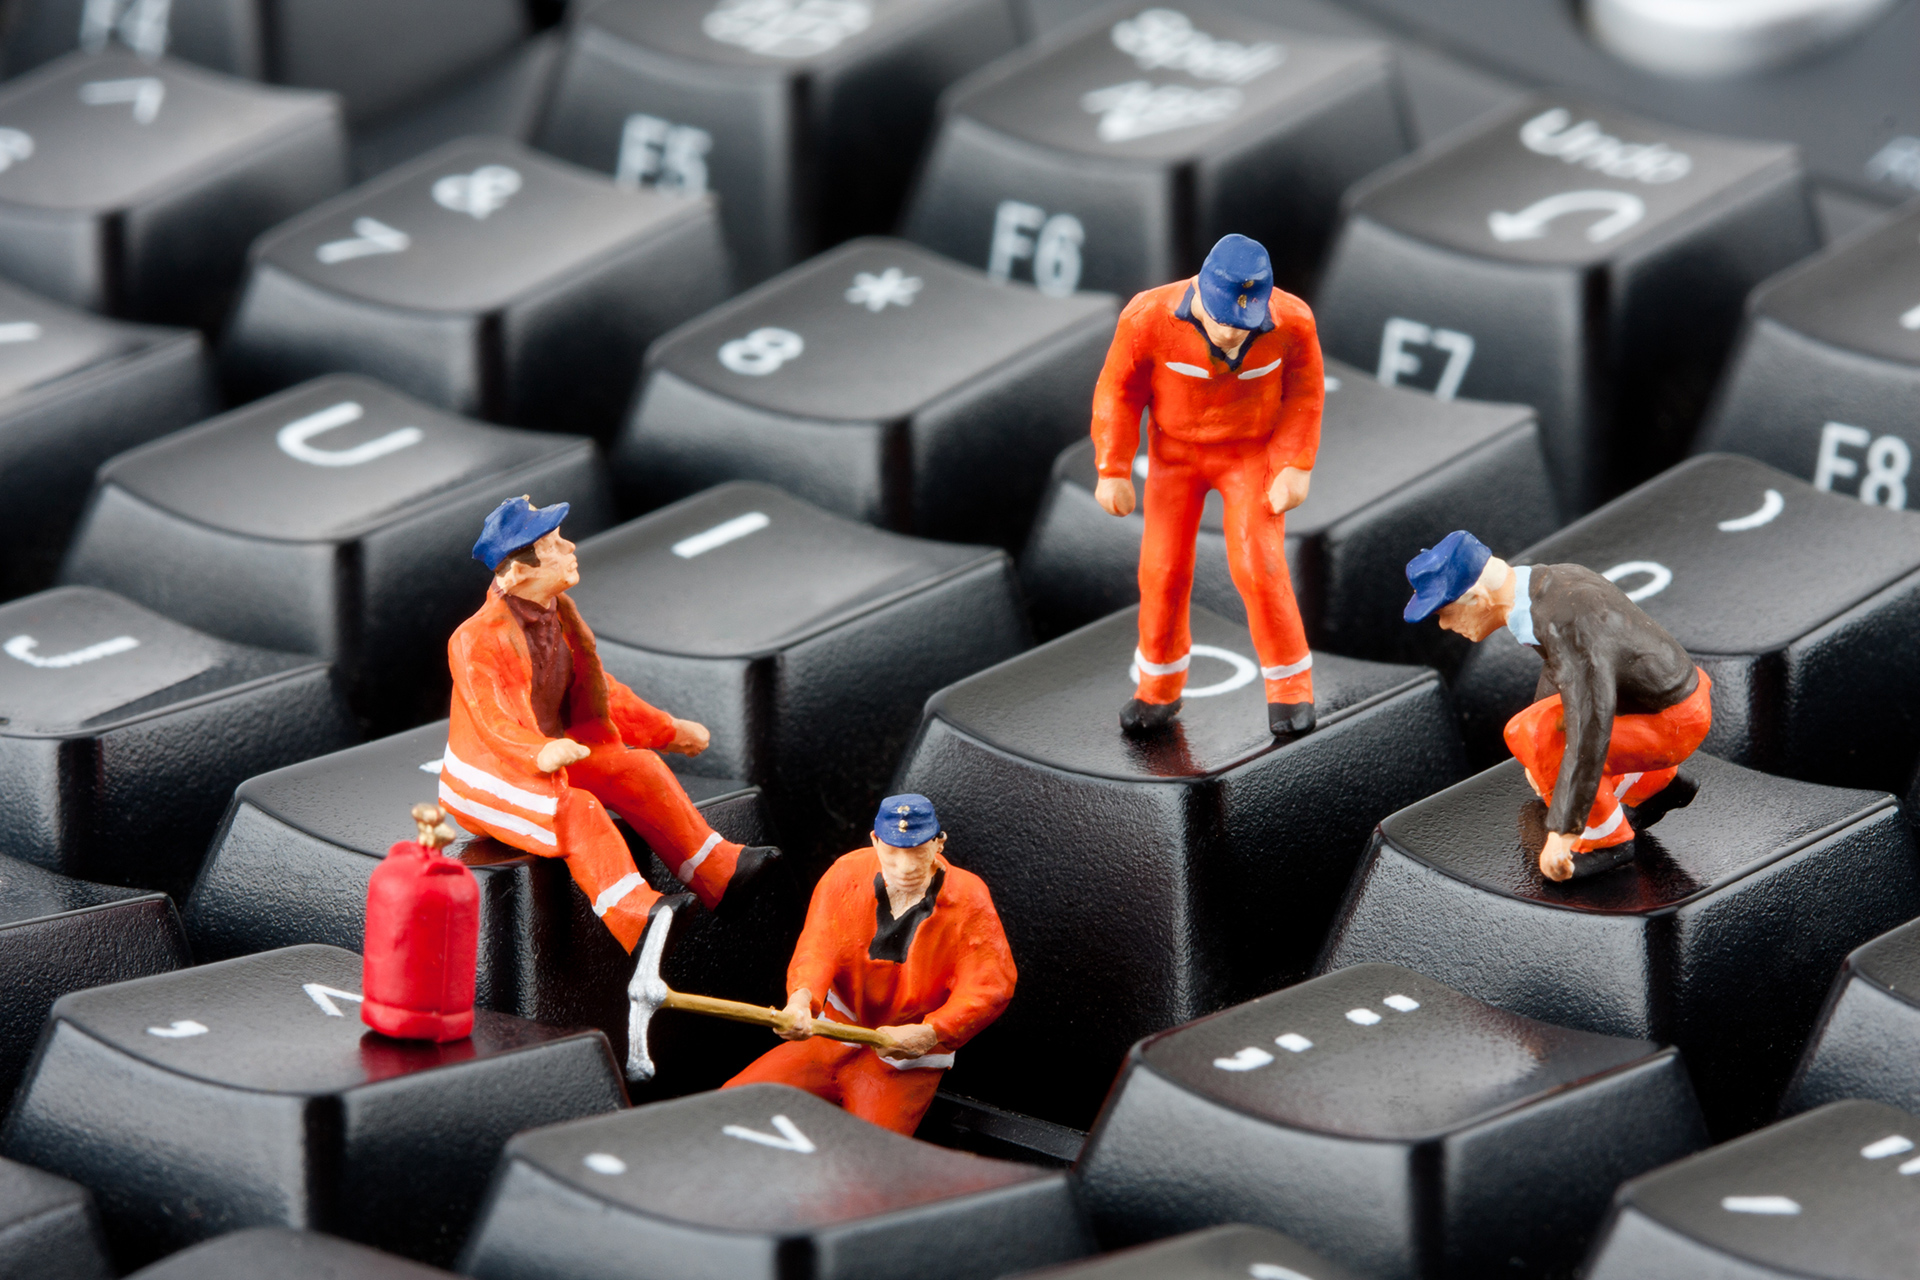 three figurines are placed on top of a computer keyboard